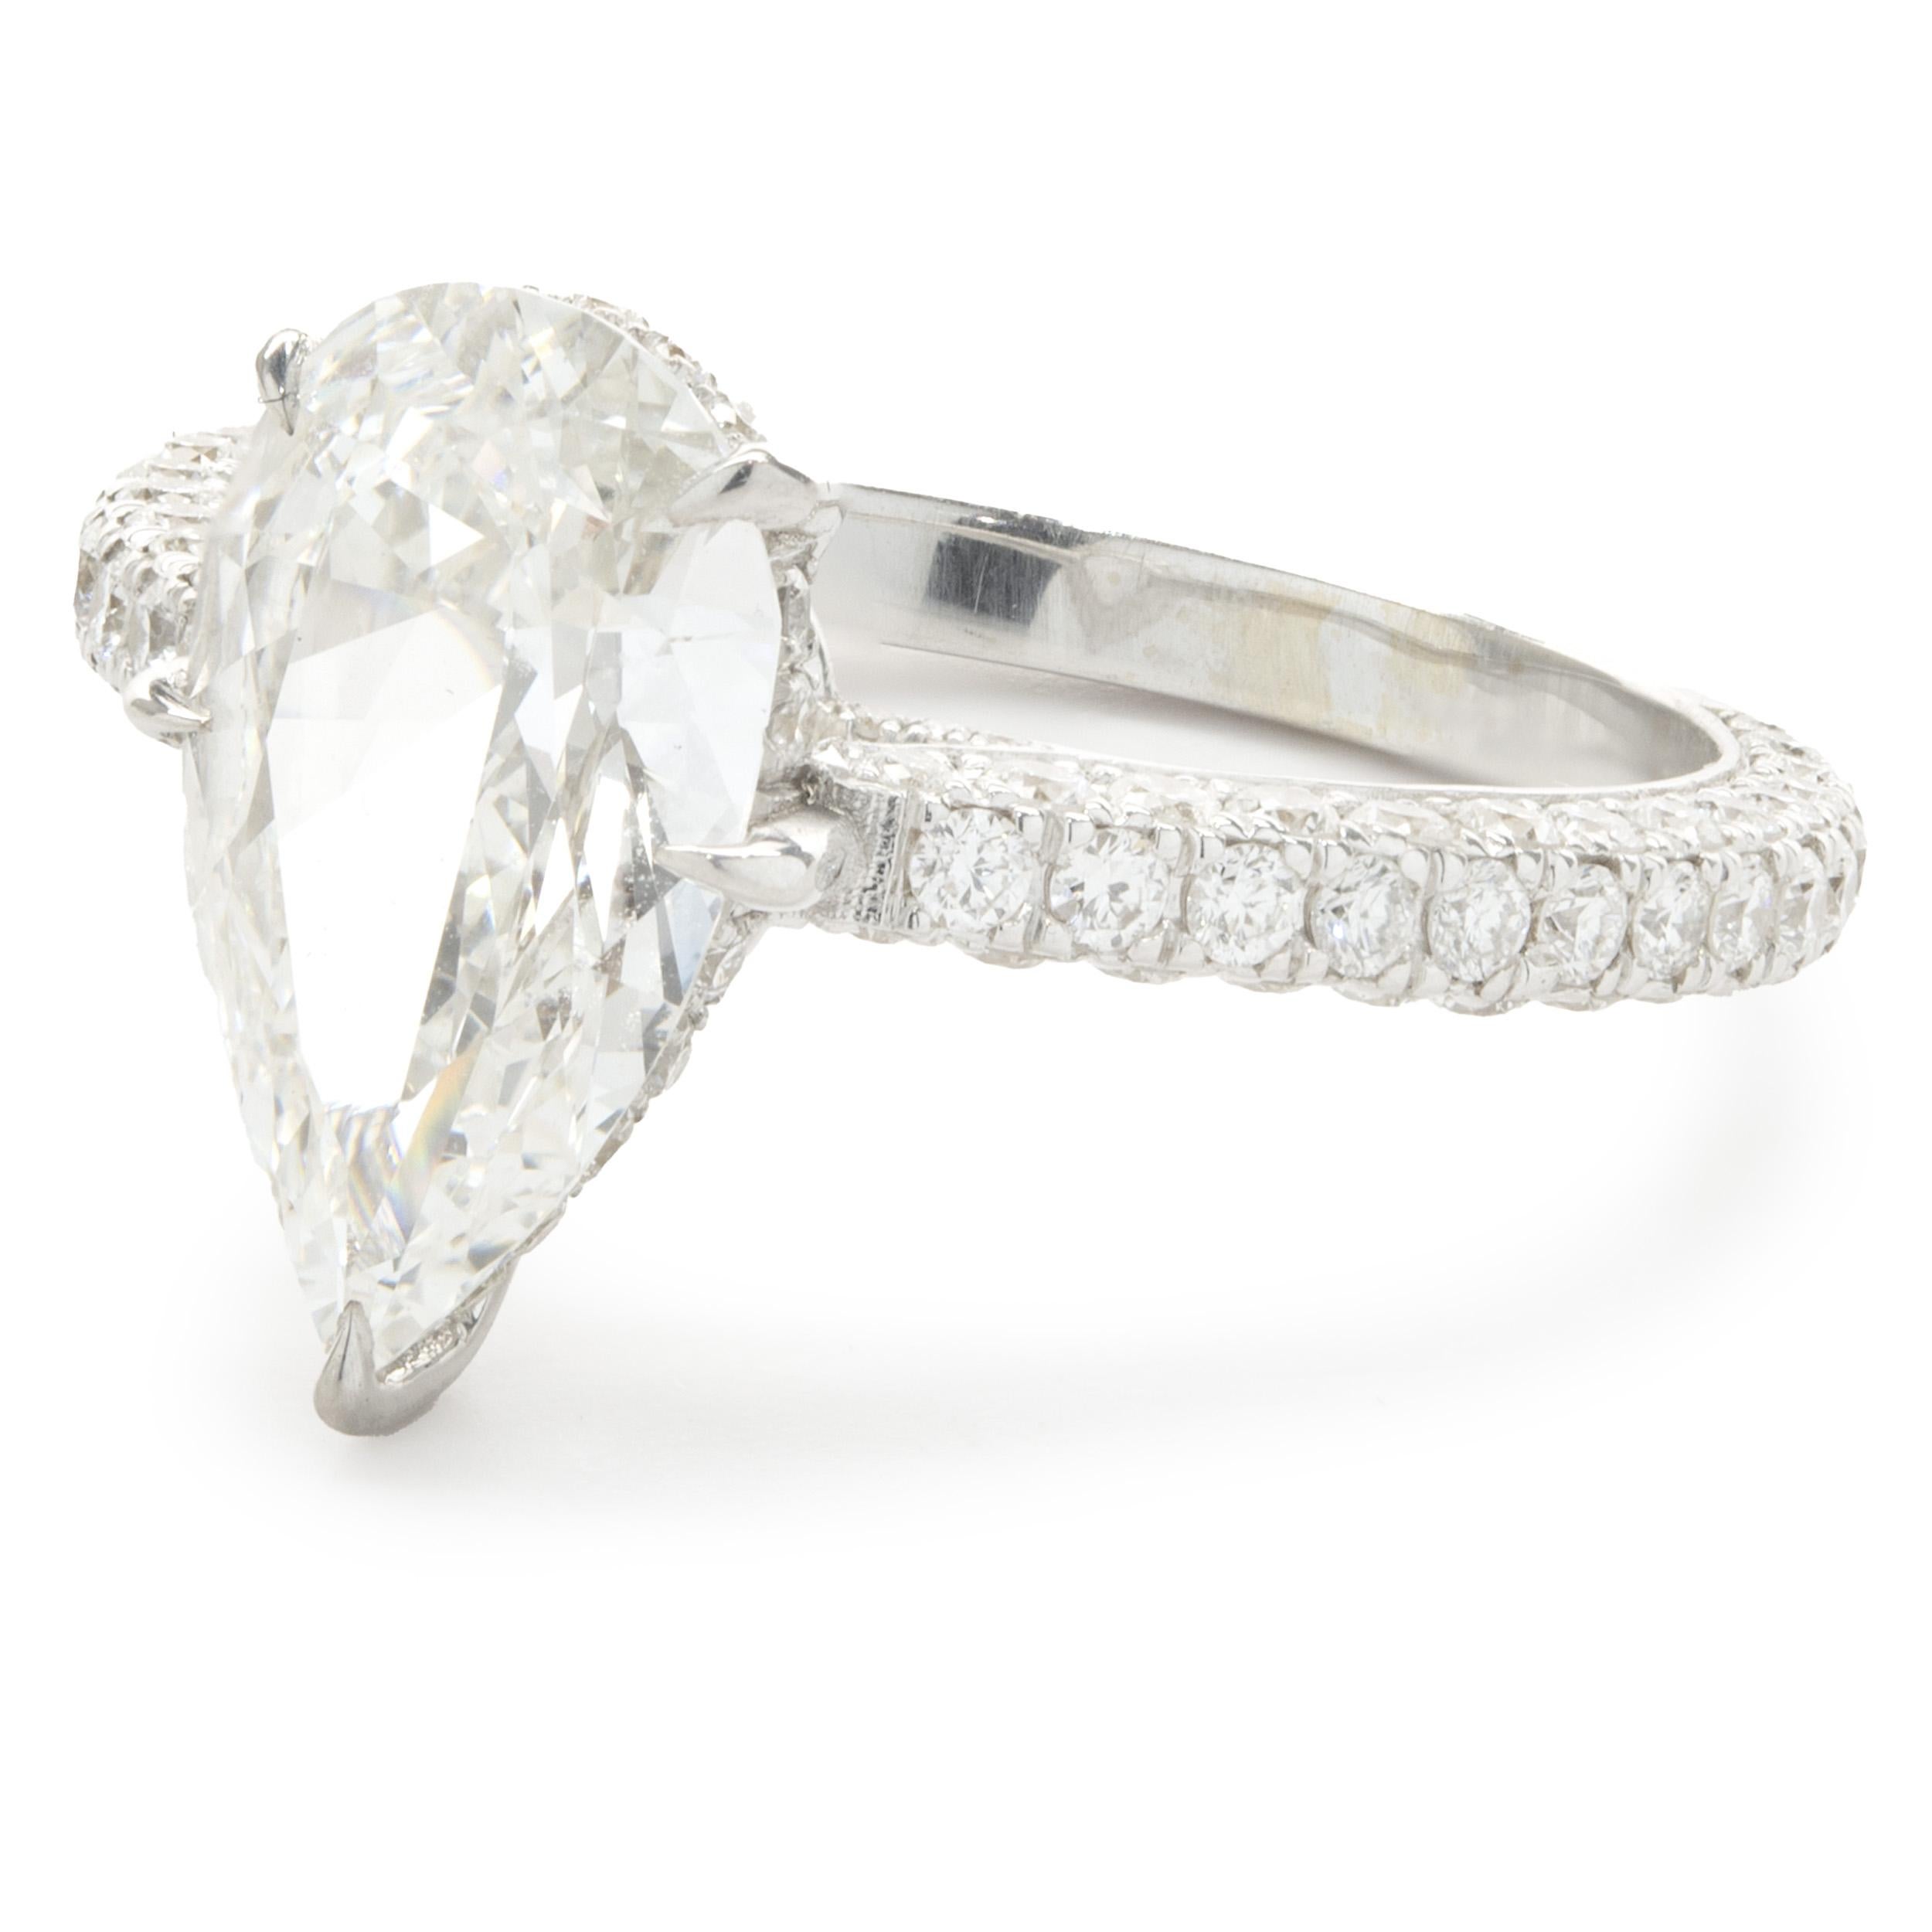 18 Karat White Gold Pear Cut Diamond Engagement Ring In Excellent Condition For Sale In Scottsdale, AZ